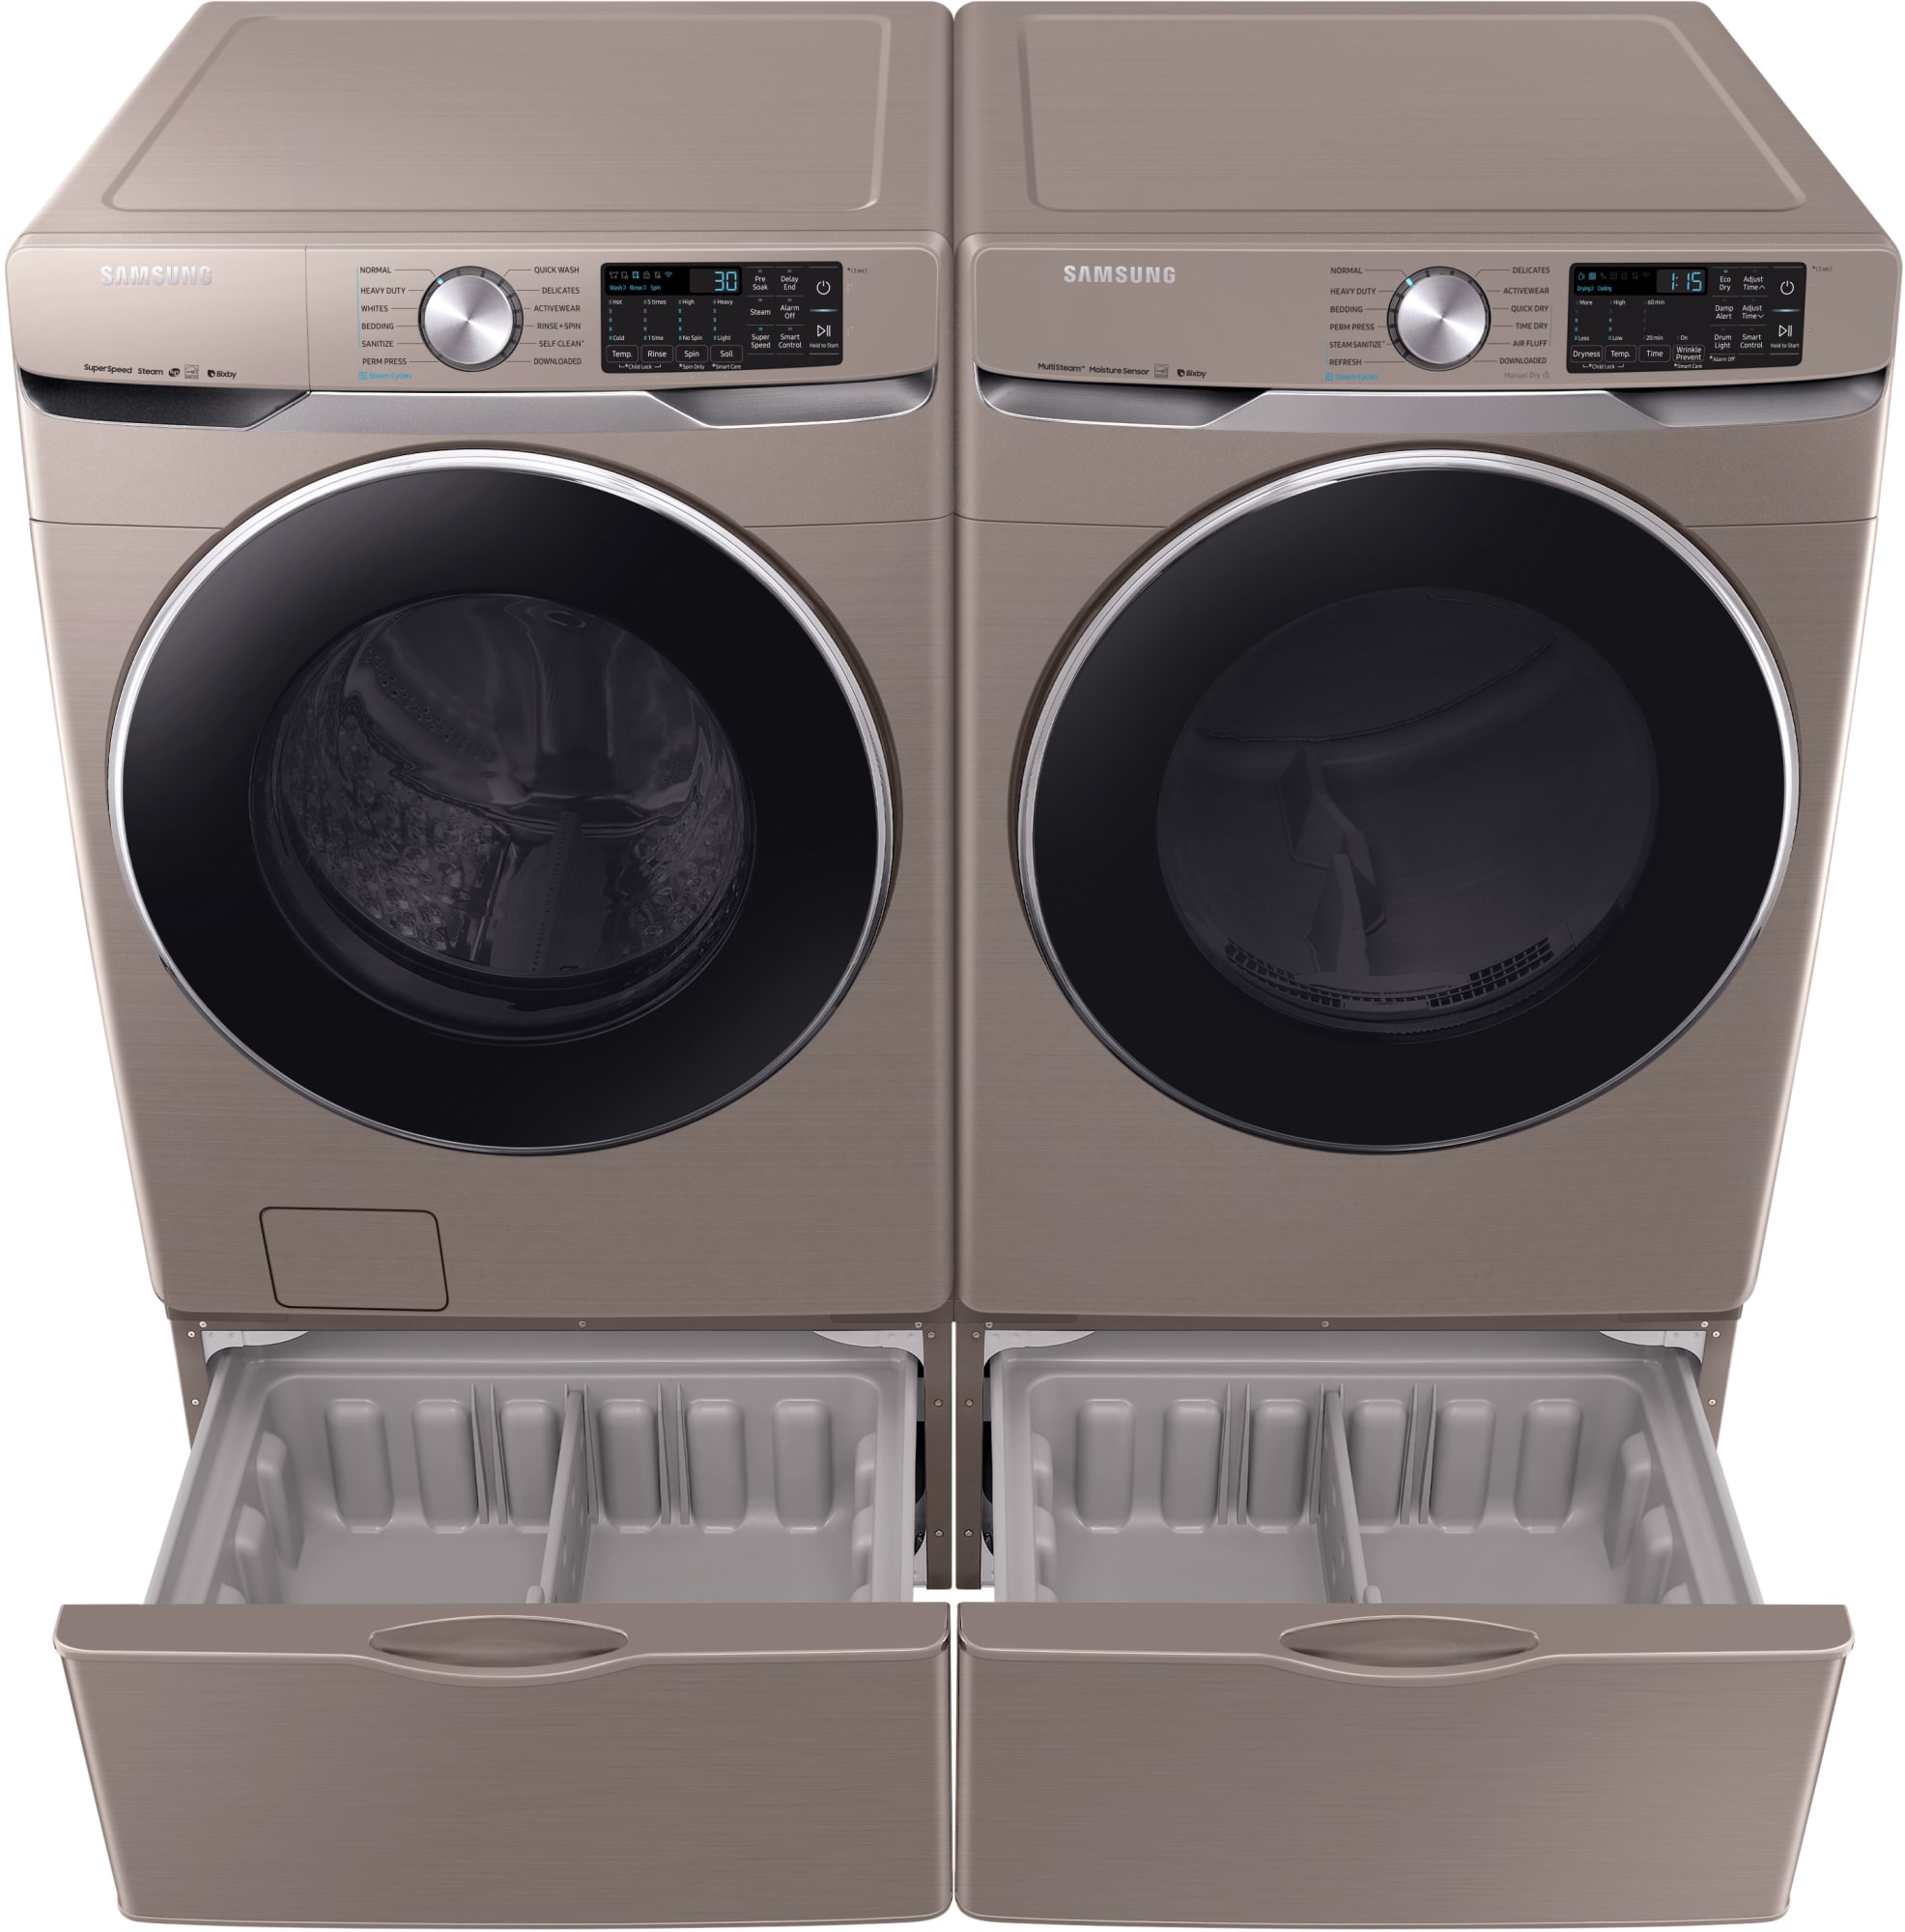 samsung-sawadrgc63001-side-by-side-washer-dryer-set-with-front-load